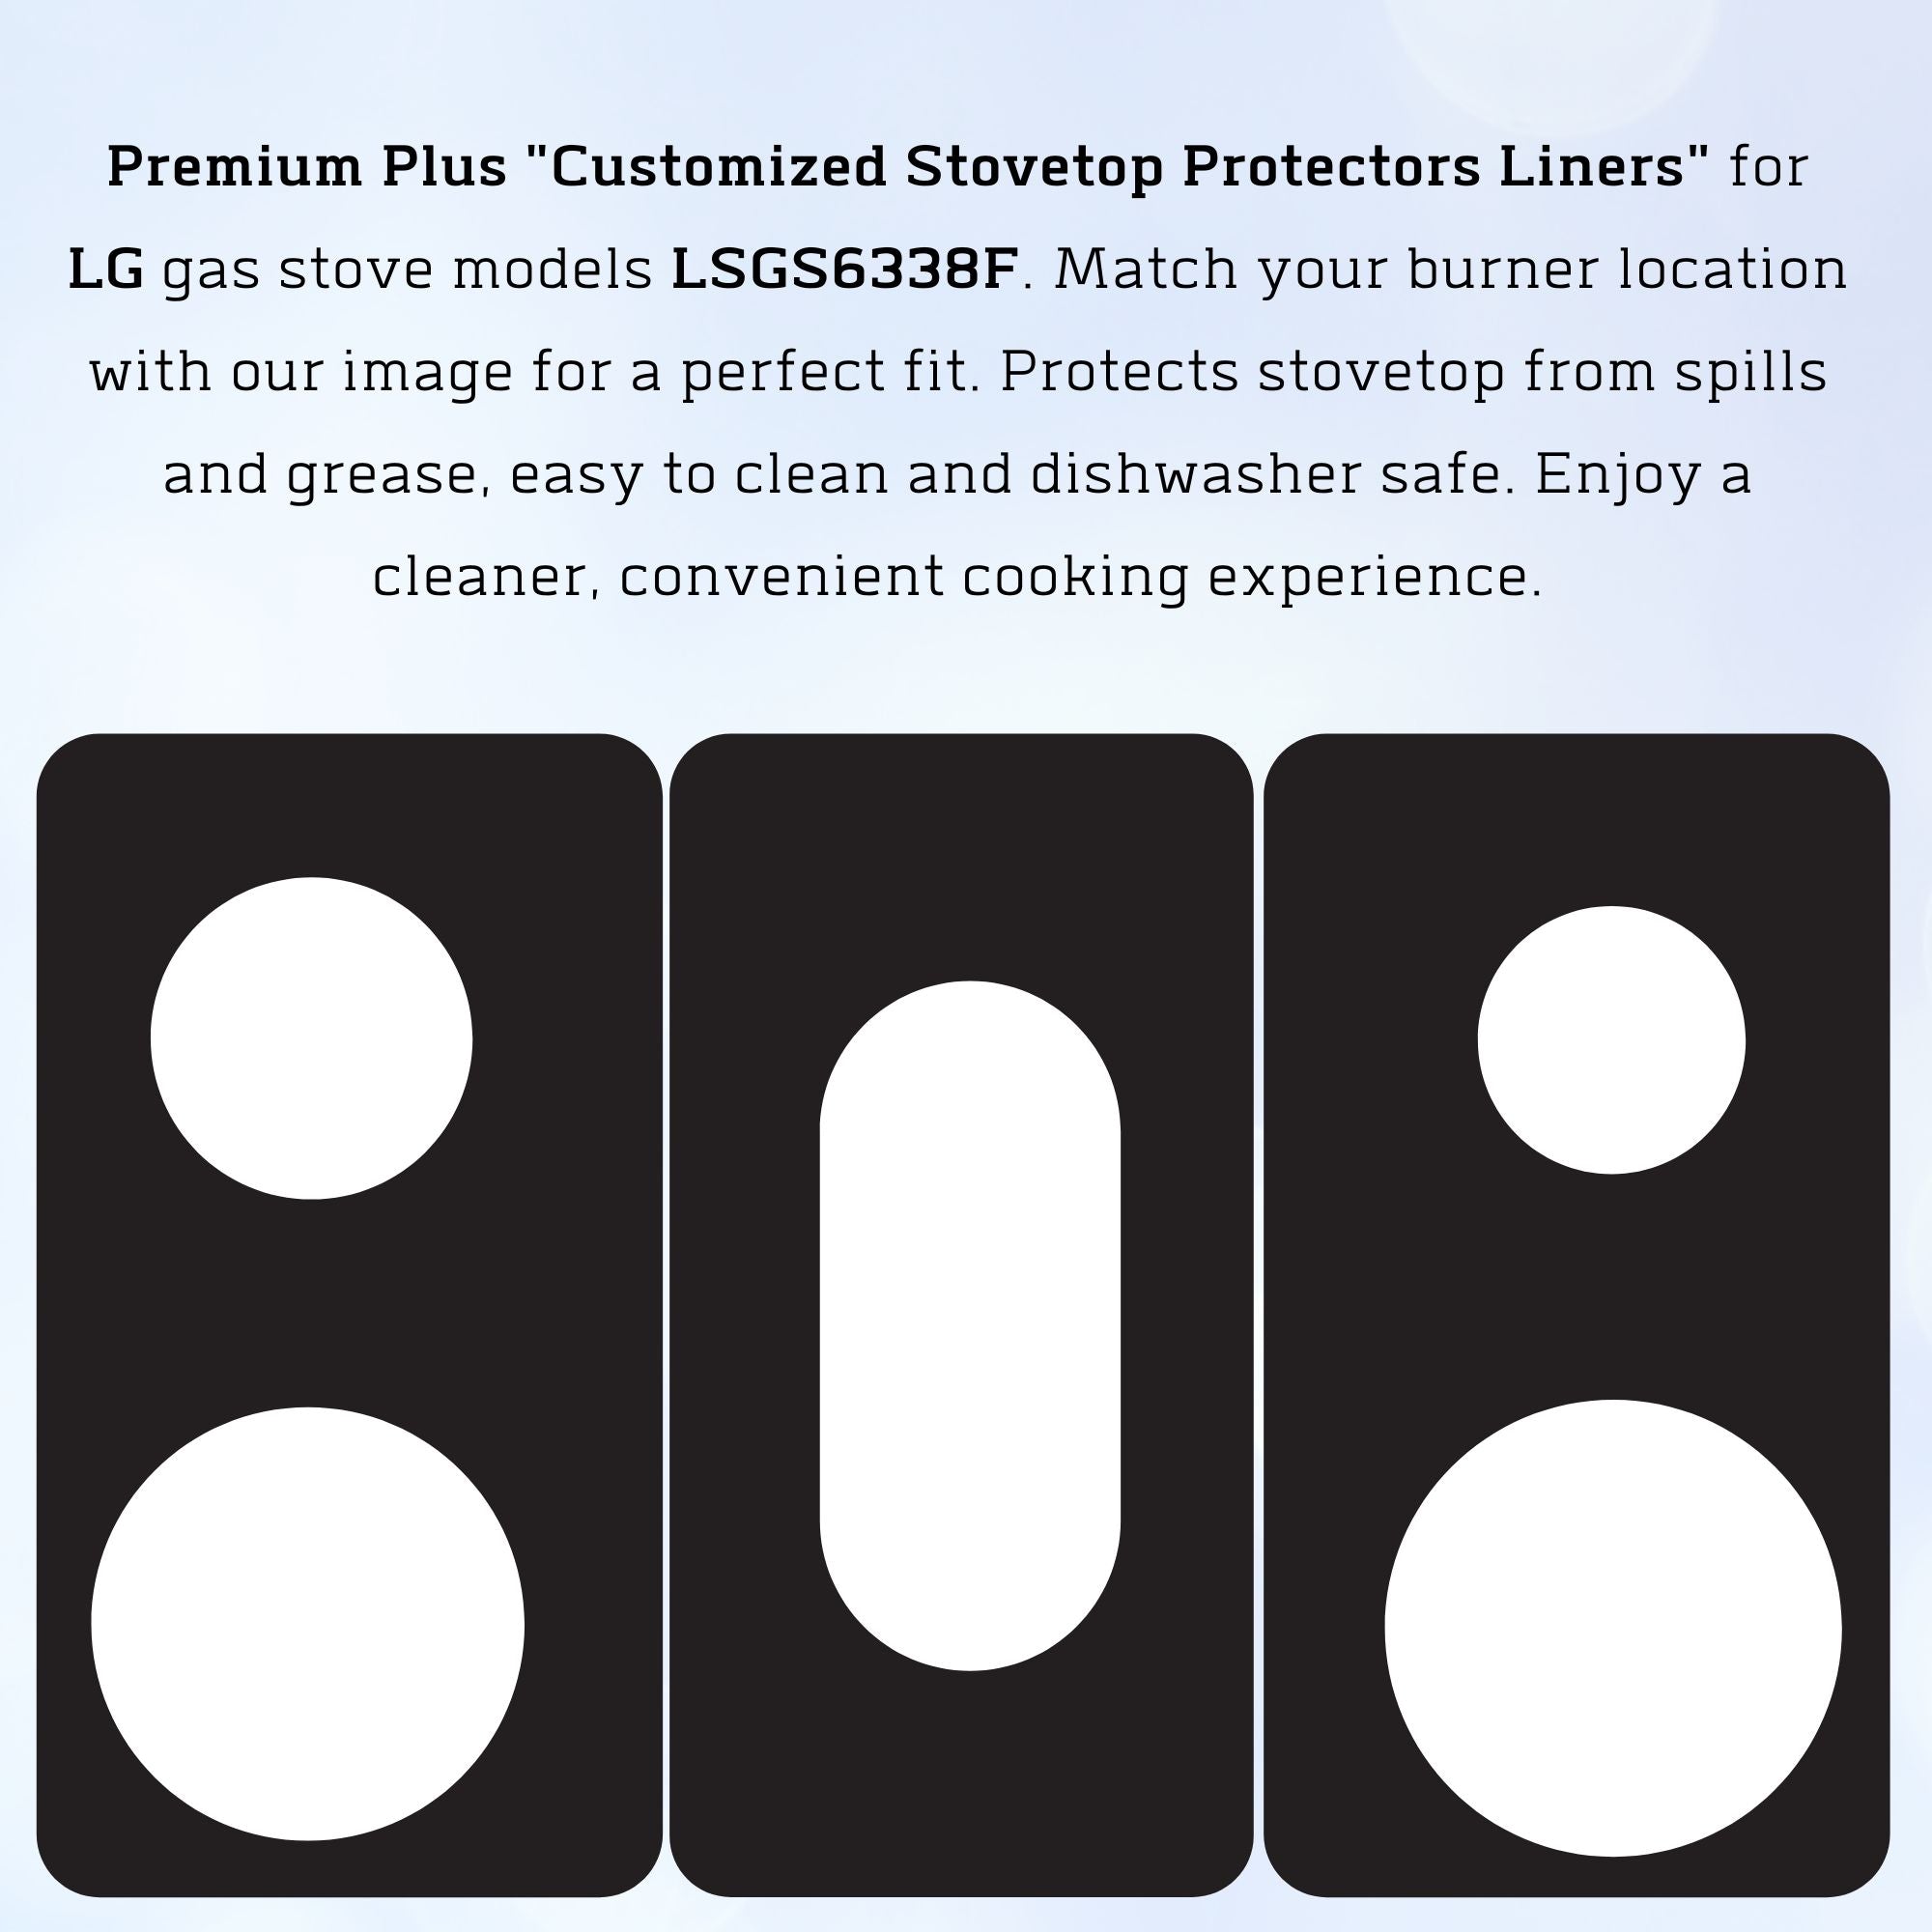 LG Stove Protector Liners - Stove Top Protector for LG Gas Ranges -  Customized - Easy Cleaning Stove Liners for LG Model LSD4913ST